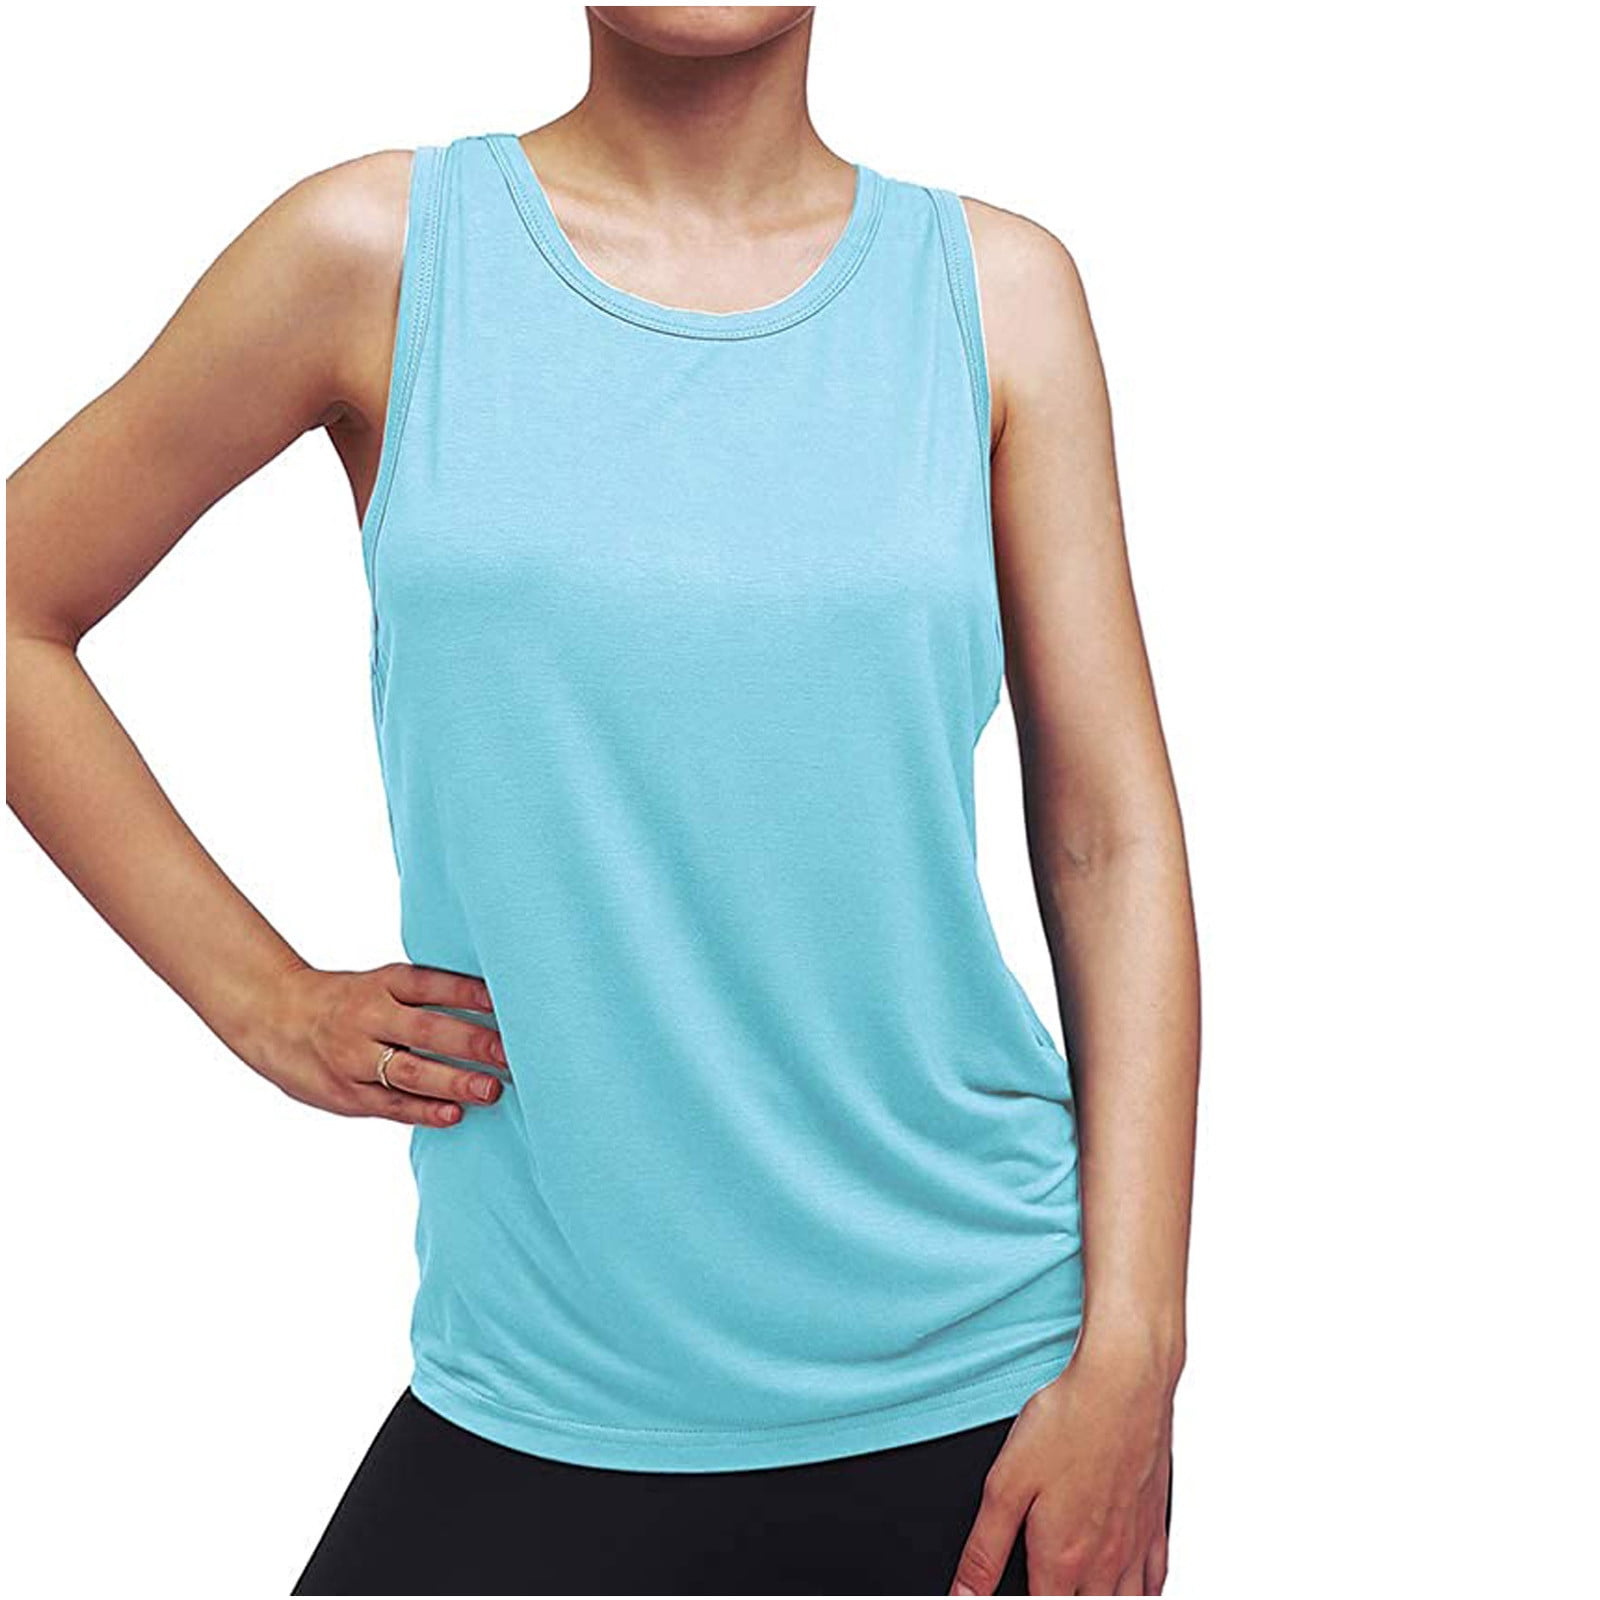 Women's Workout Racerback Tank Tops Tie Back Sleeveless Open Back Athletic  Running Gym Yoga Shirts Sportswear Ladies Clothes - Walmart.com